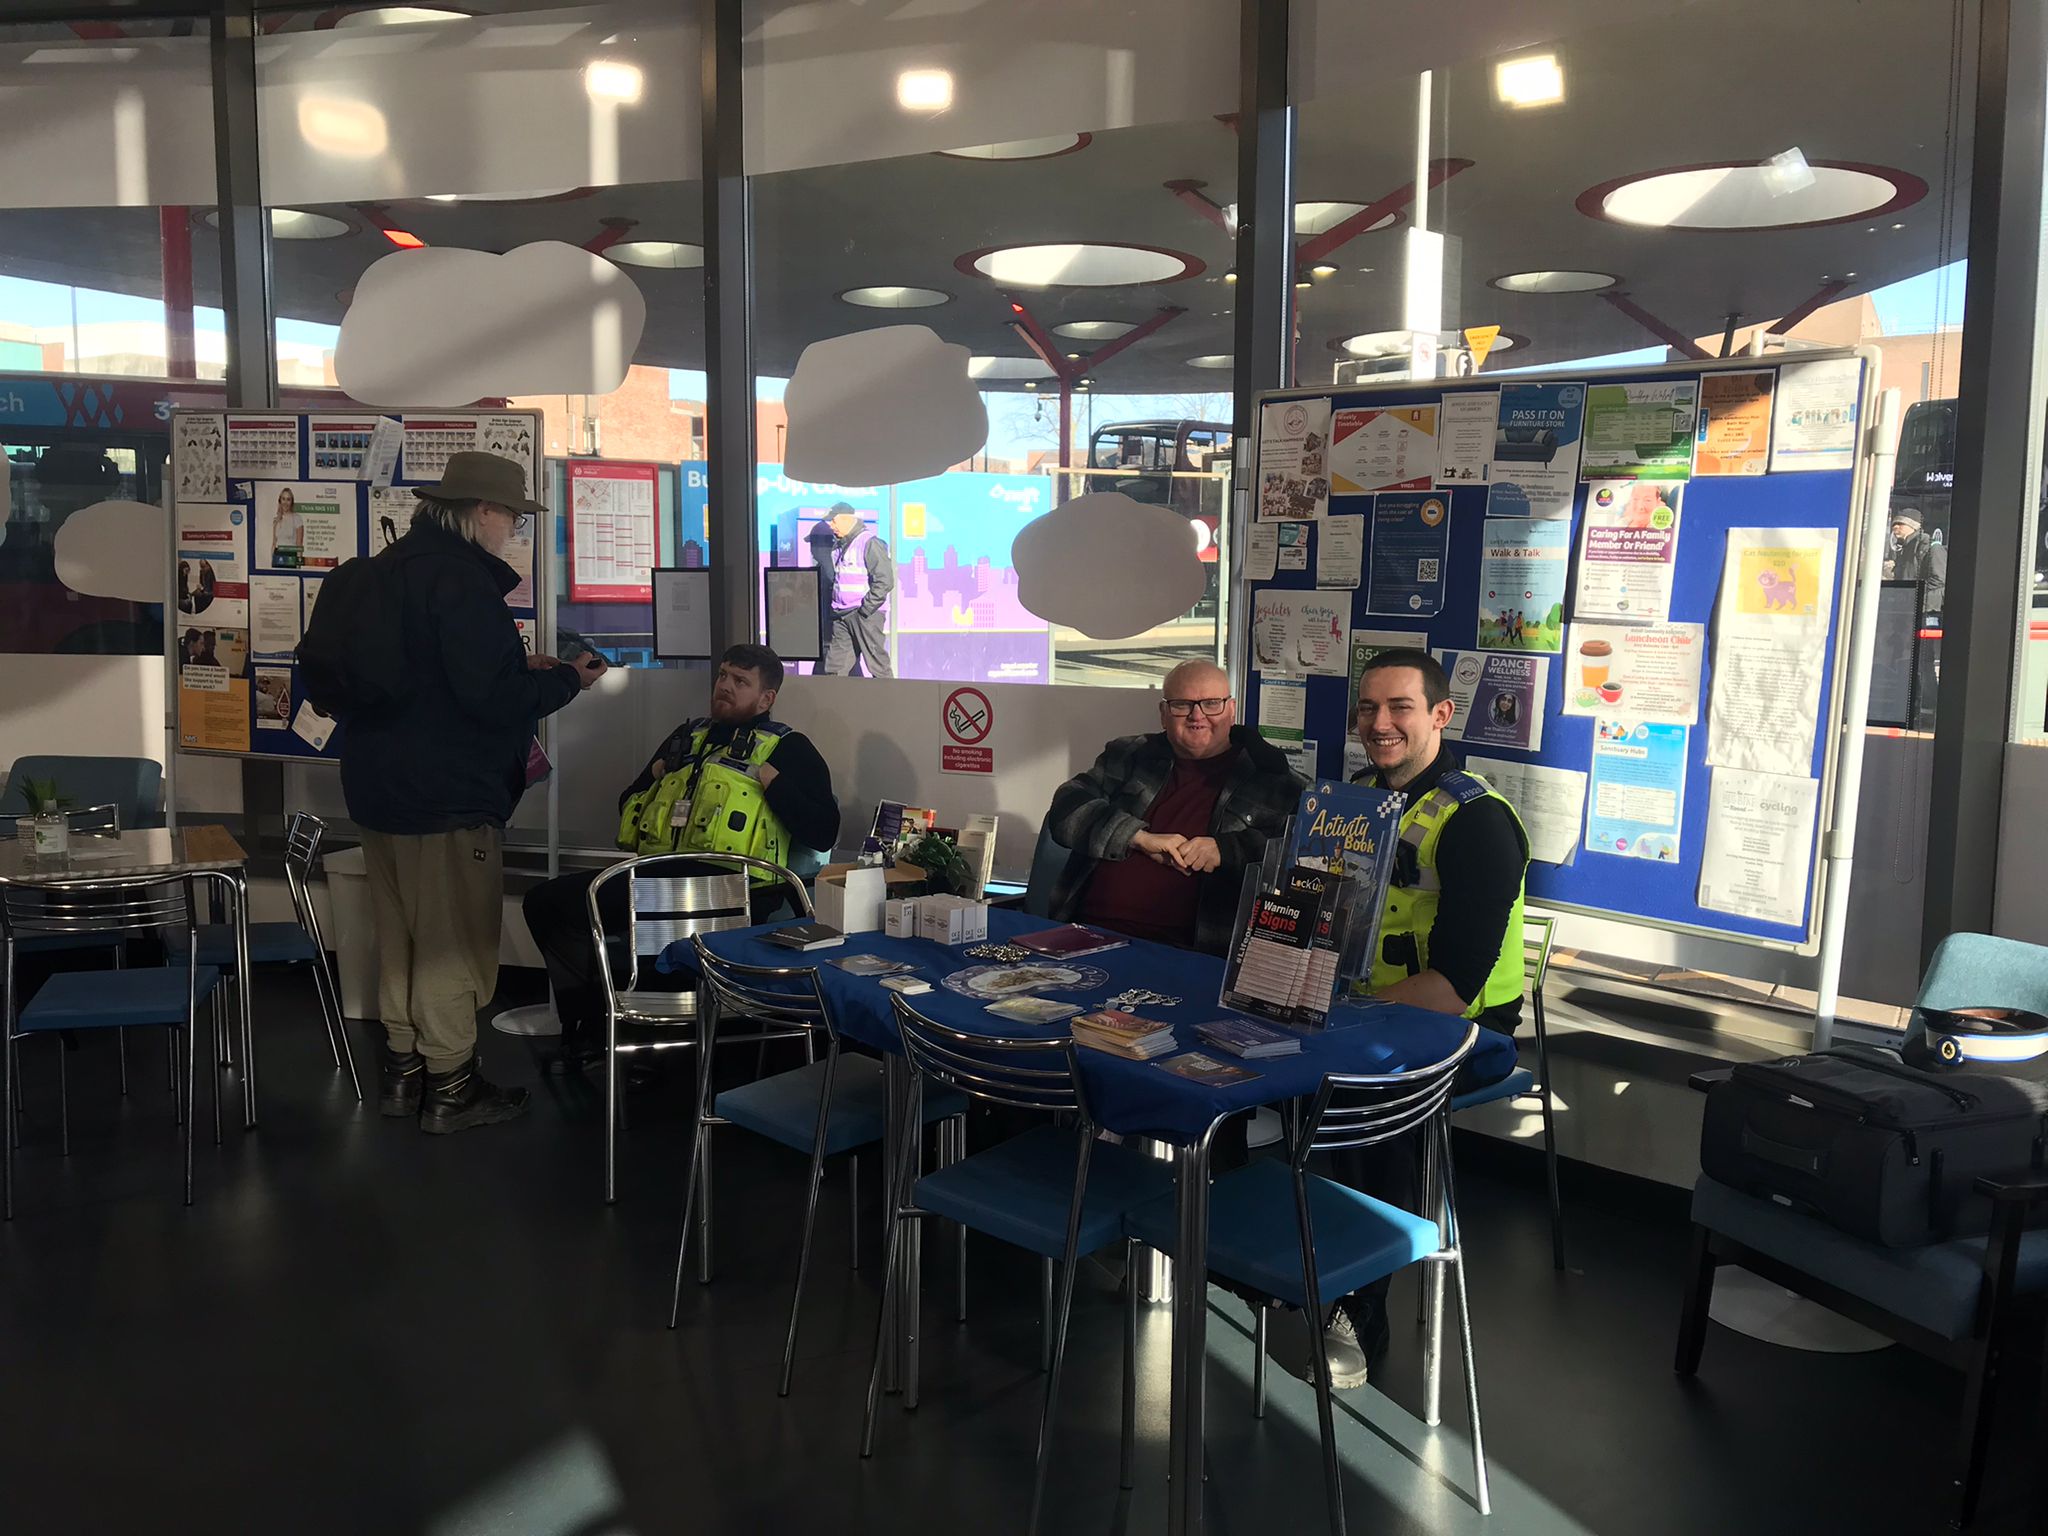 Monthly Police Workshop at Walsall Hub